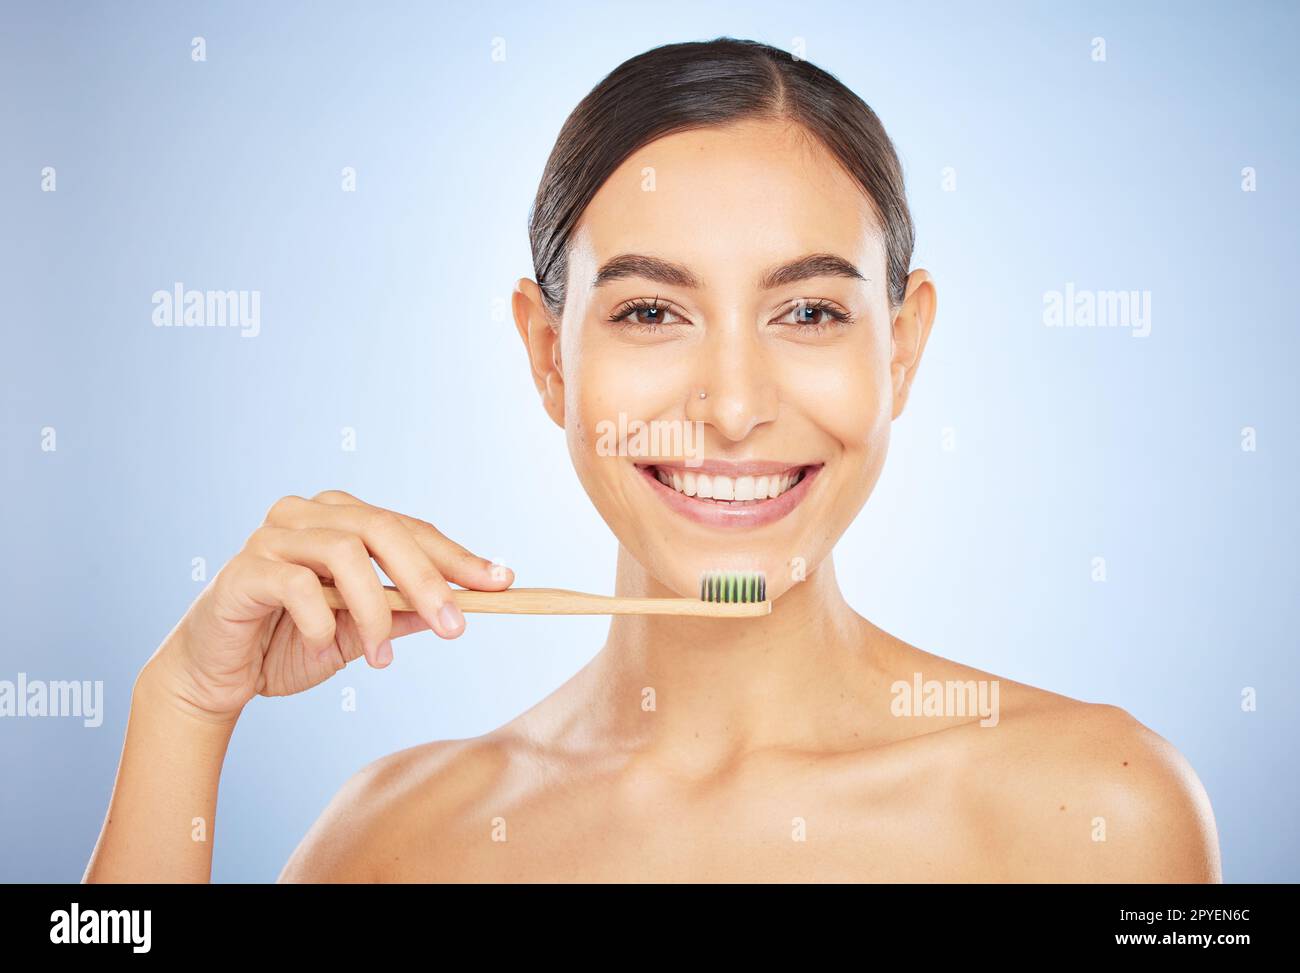 Face portrait, dental and woman with toothbrush in studio isolated on a blue background. Oral wellness, veneers and happy female model holding product for brushing teeth, cleaning and oral hygiene. Stock Photo